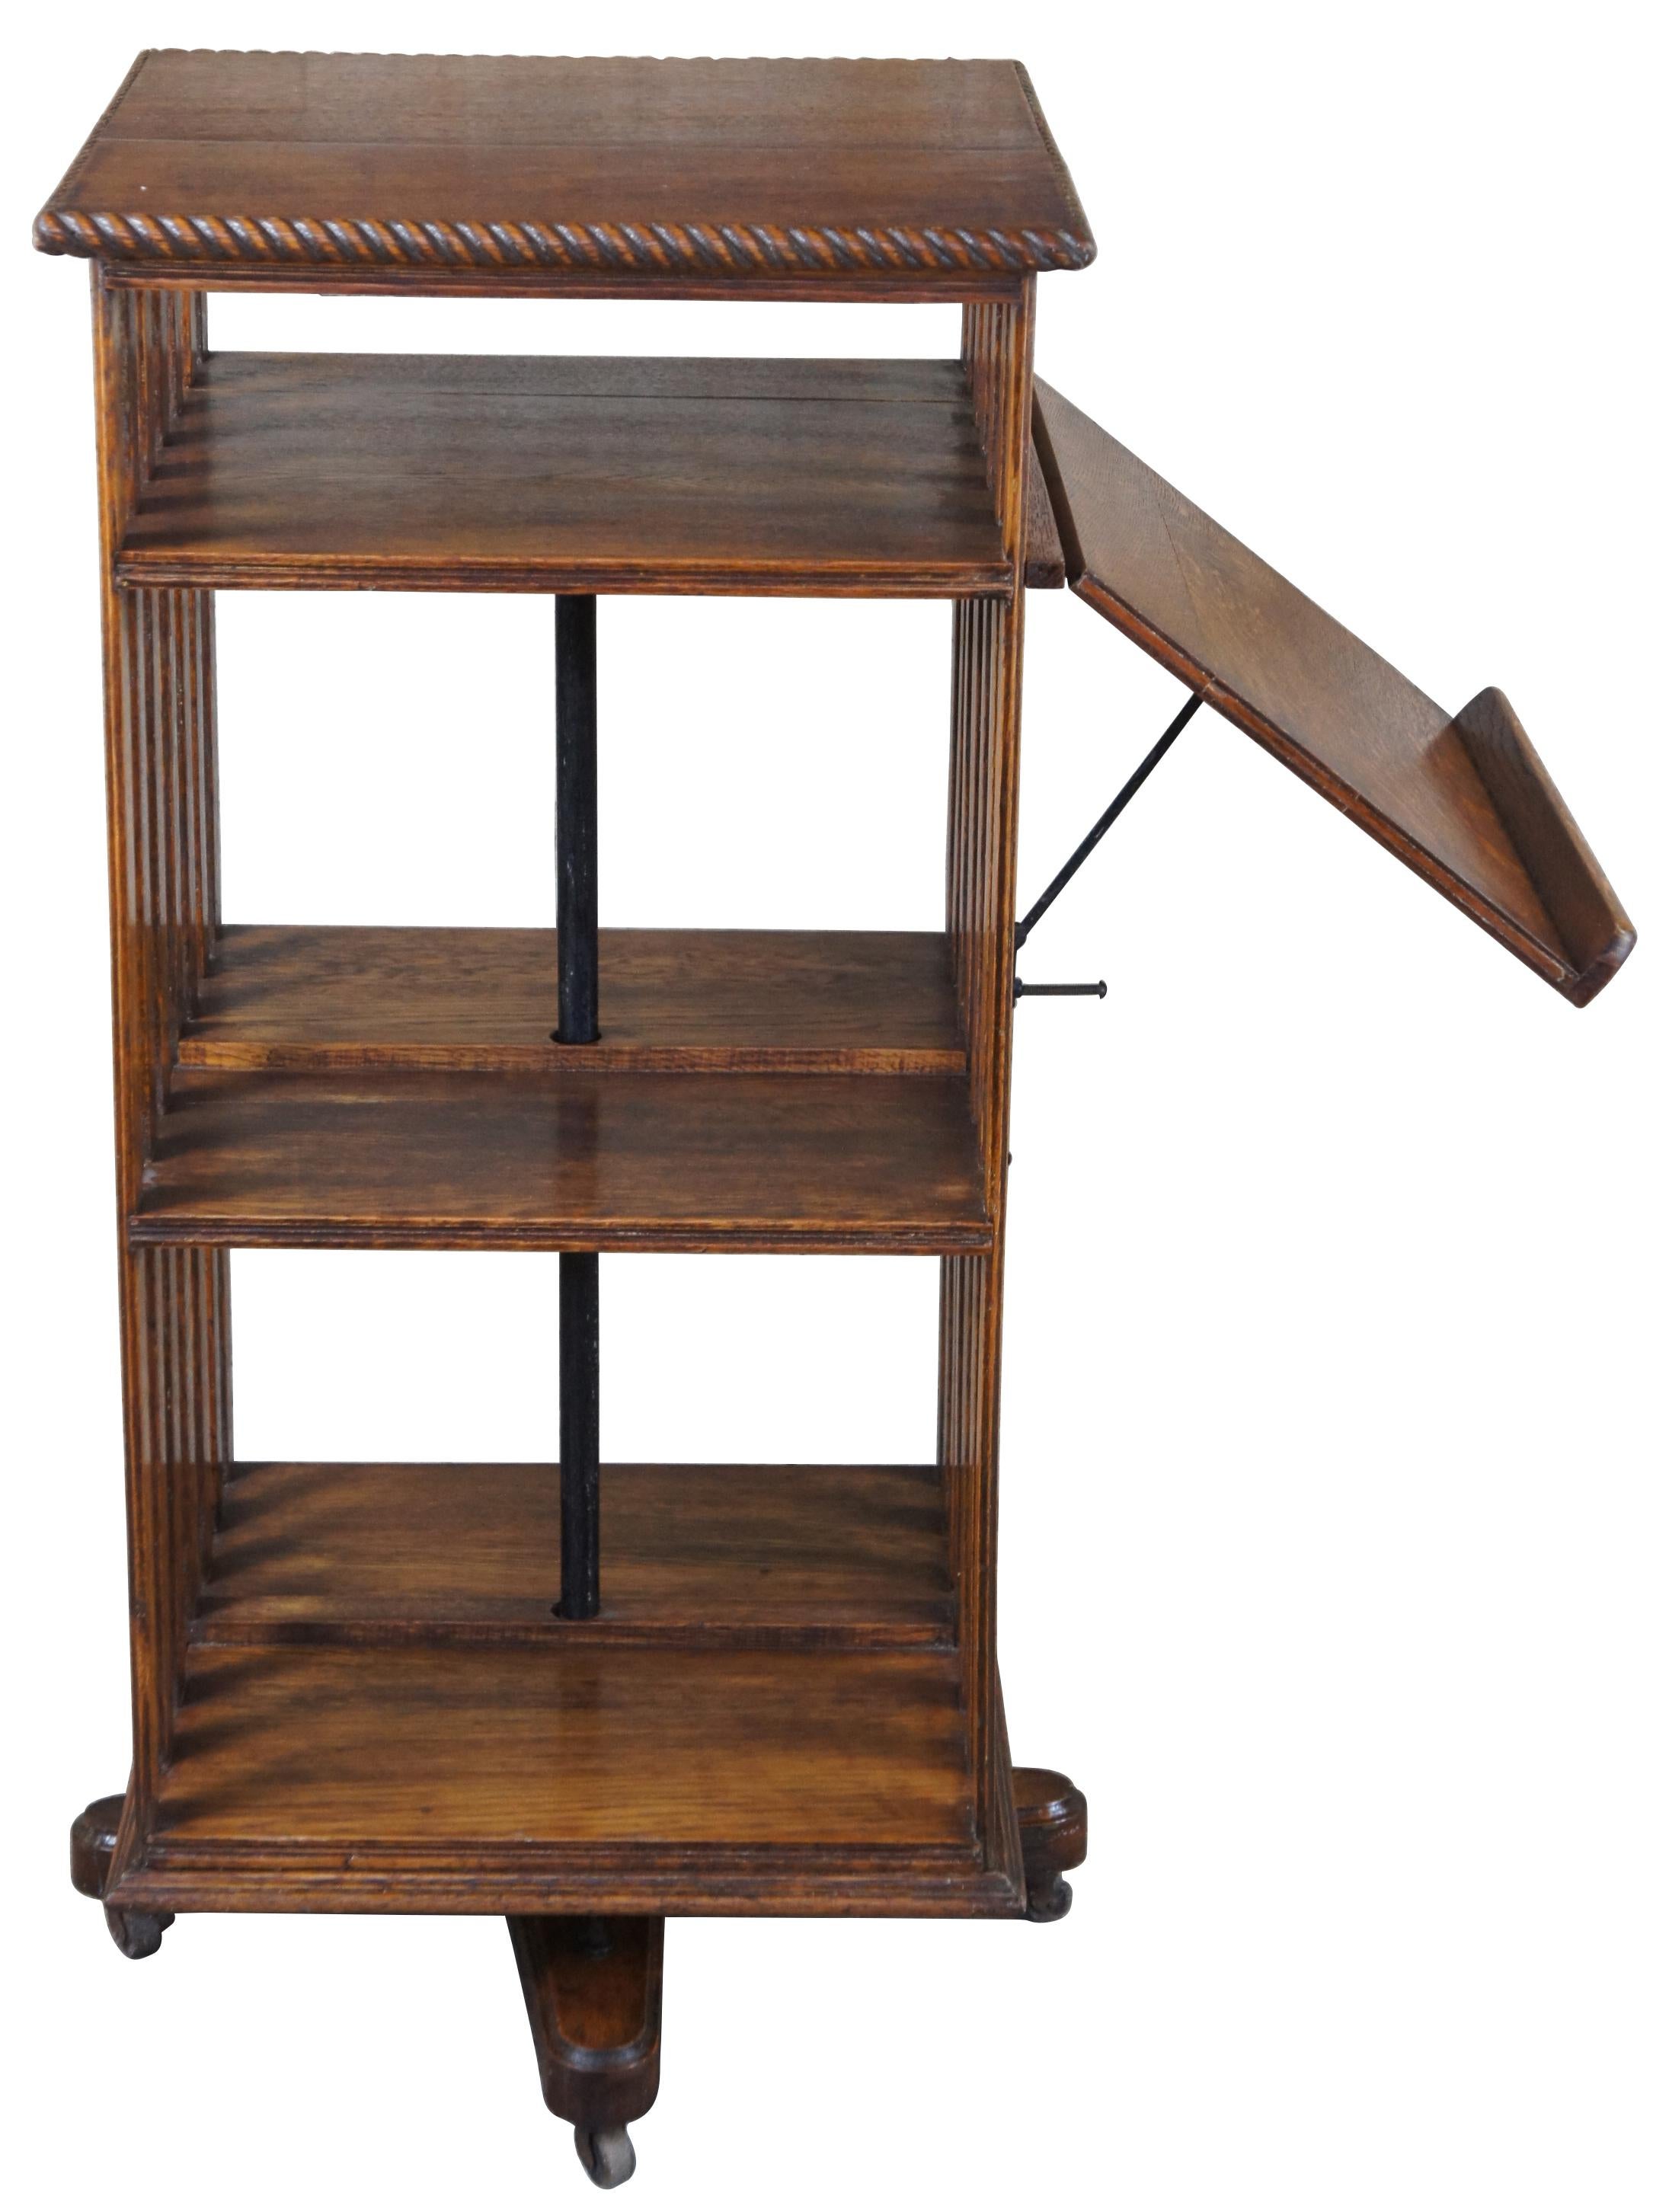 Antique Edwardian / Victorian revolving / rotating library bookcase or pedestal book stand. Made of quartersawn oak featuring mission / arts and crafts styling with slatted sides, rope twist edge and rare folding lectern attachment.

Measures: